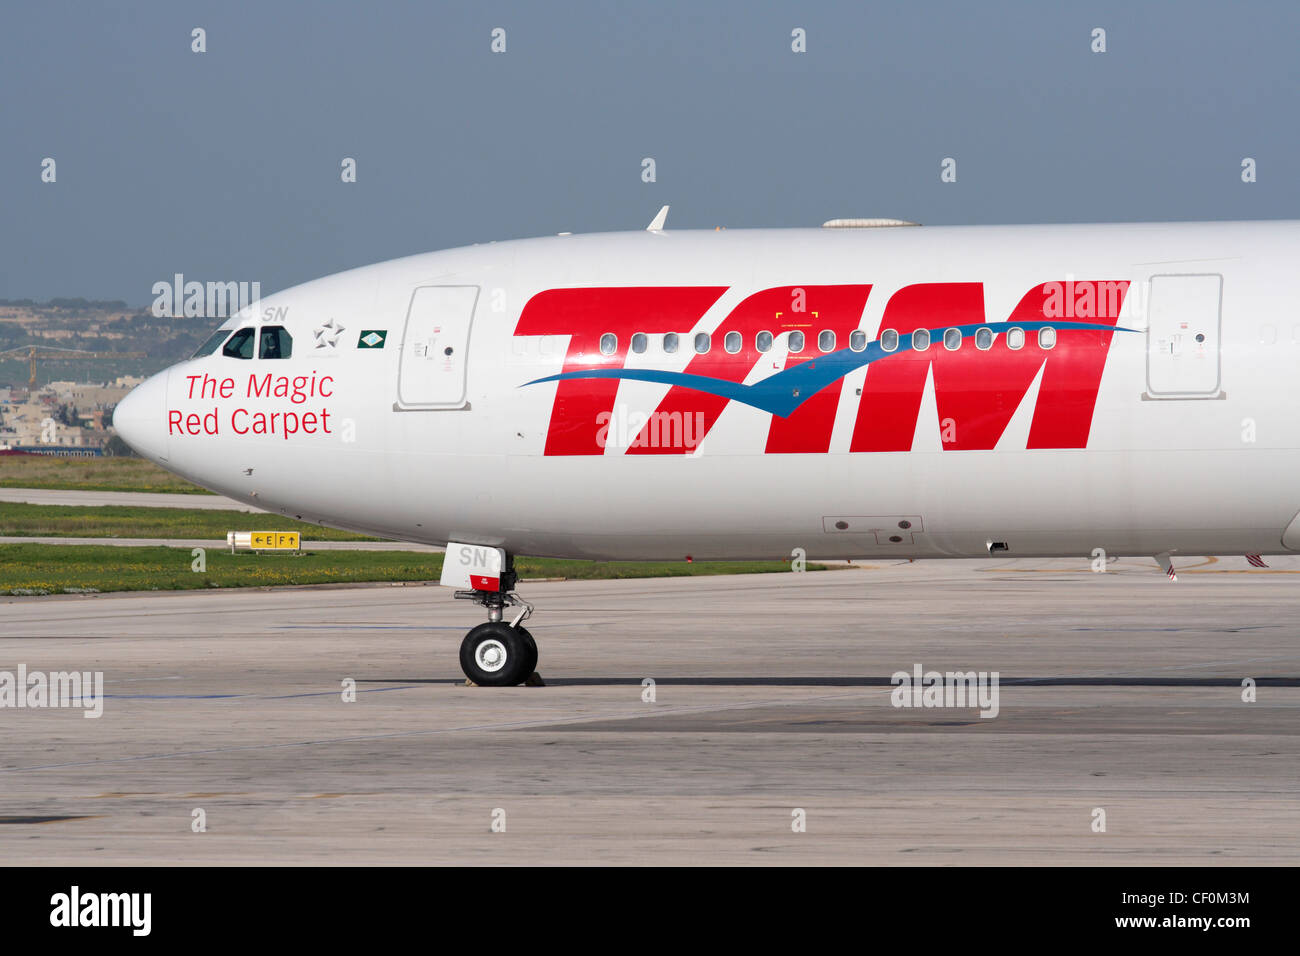 Close-up of the nose section of a TAM Airlines Airbus A340-500 long haul passenger jet airliner Stock Photo